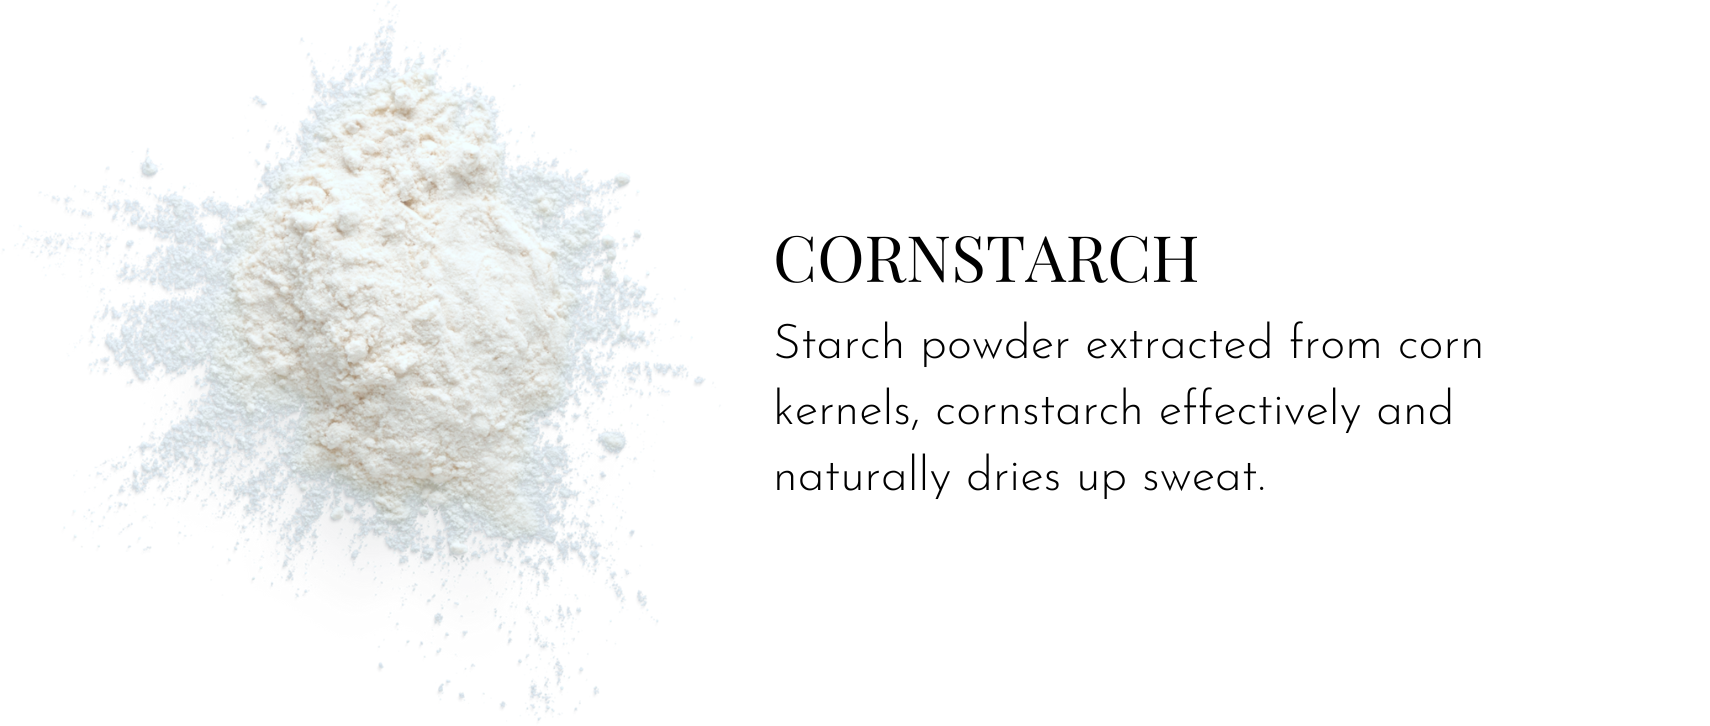 Cornstarch – Starch powder extracted from corn kernels, cornstarch effectively and naturally dries up sweat.